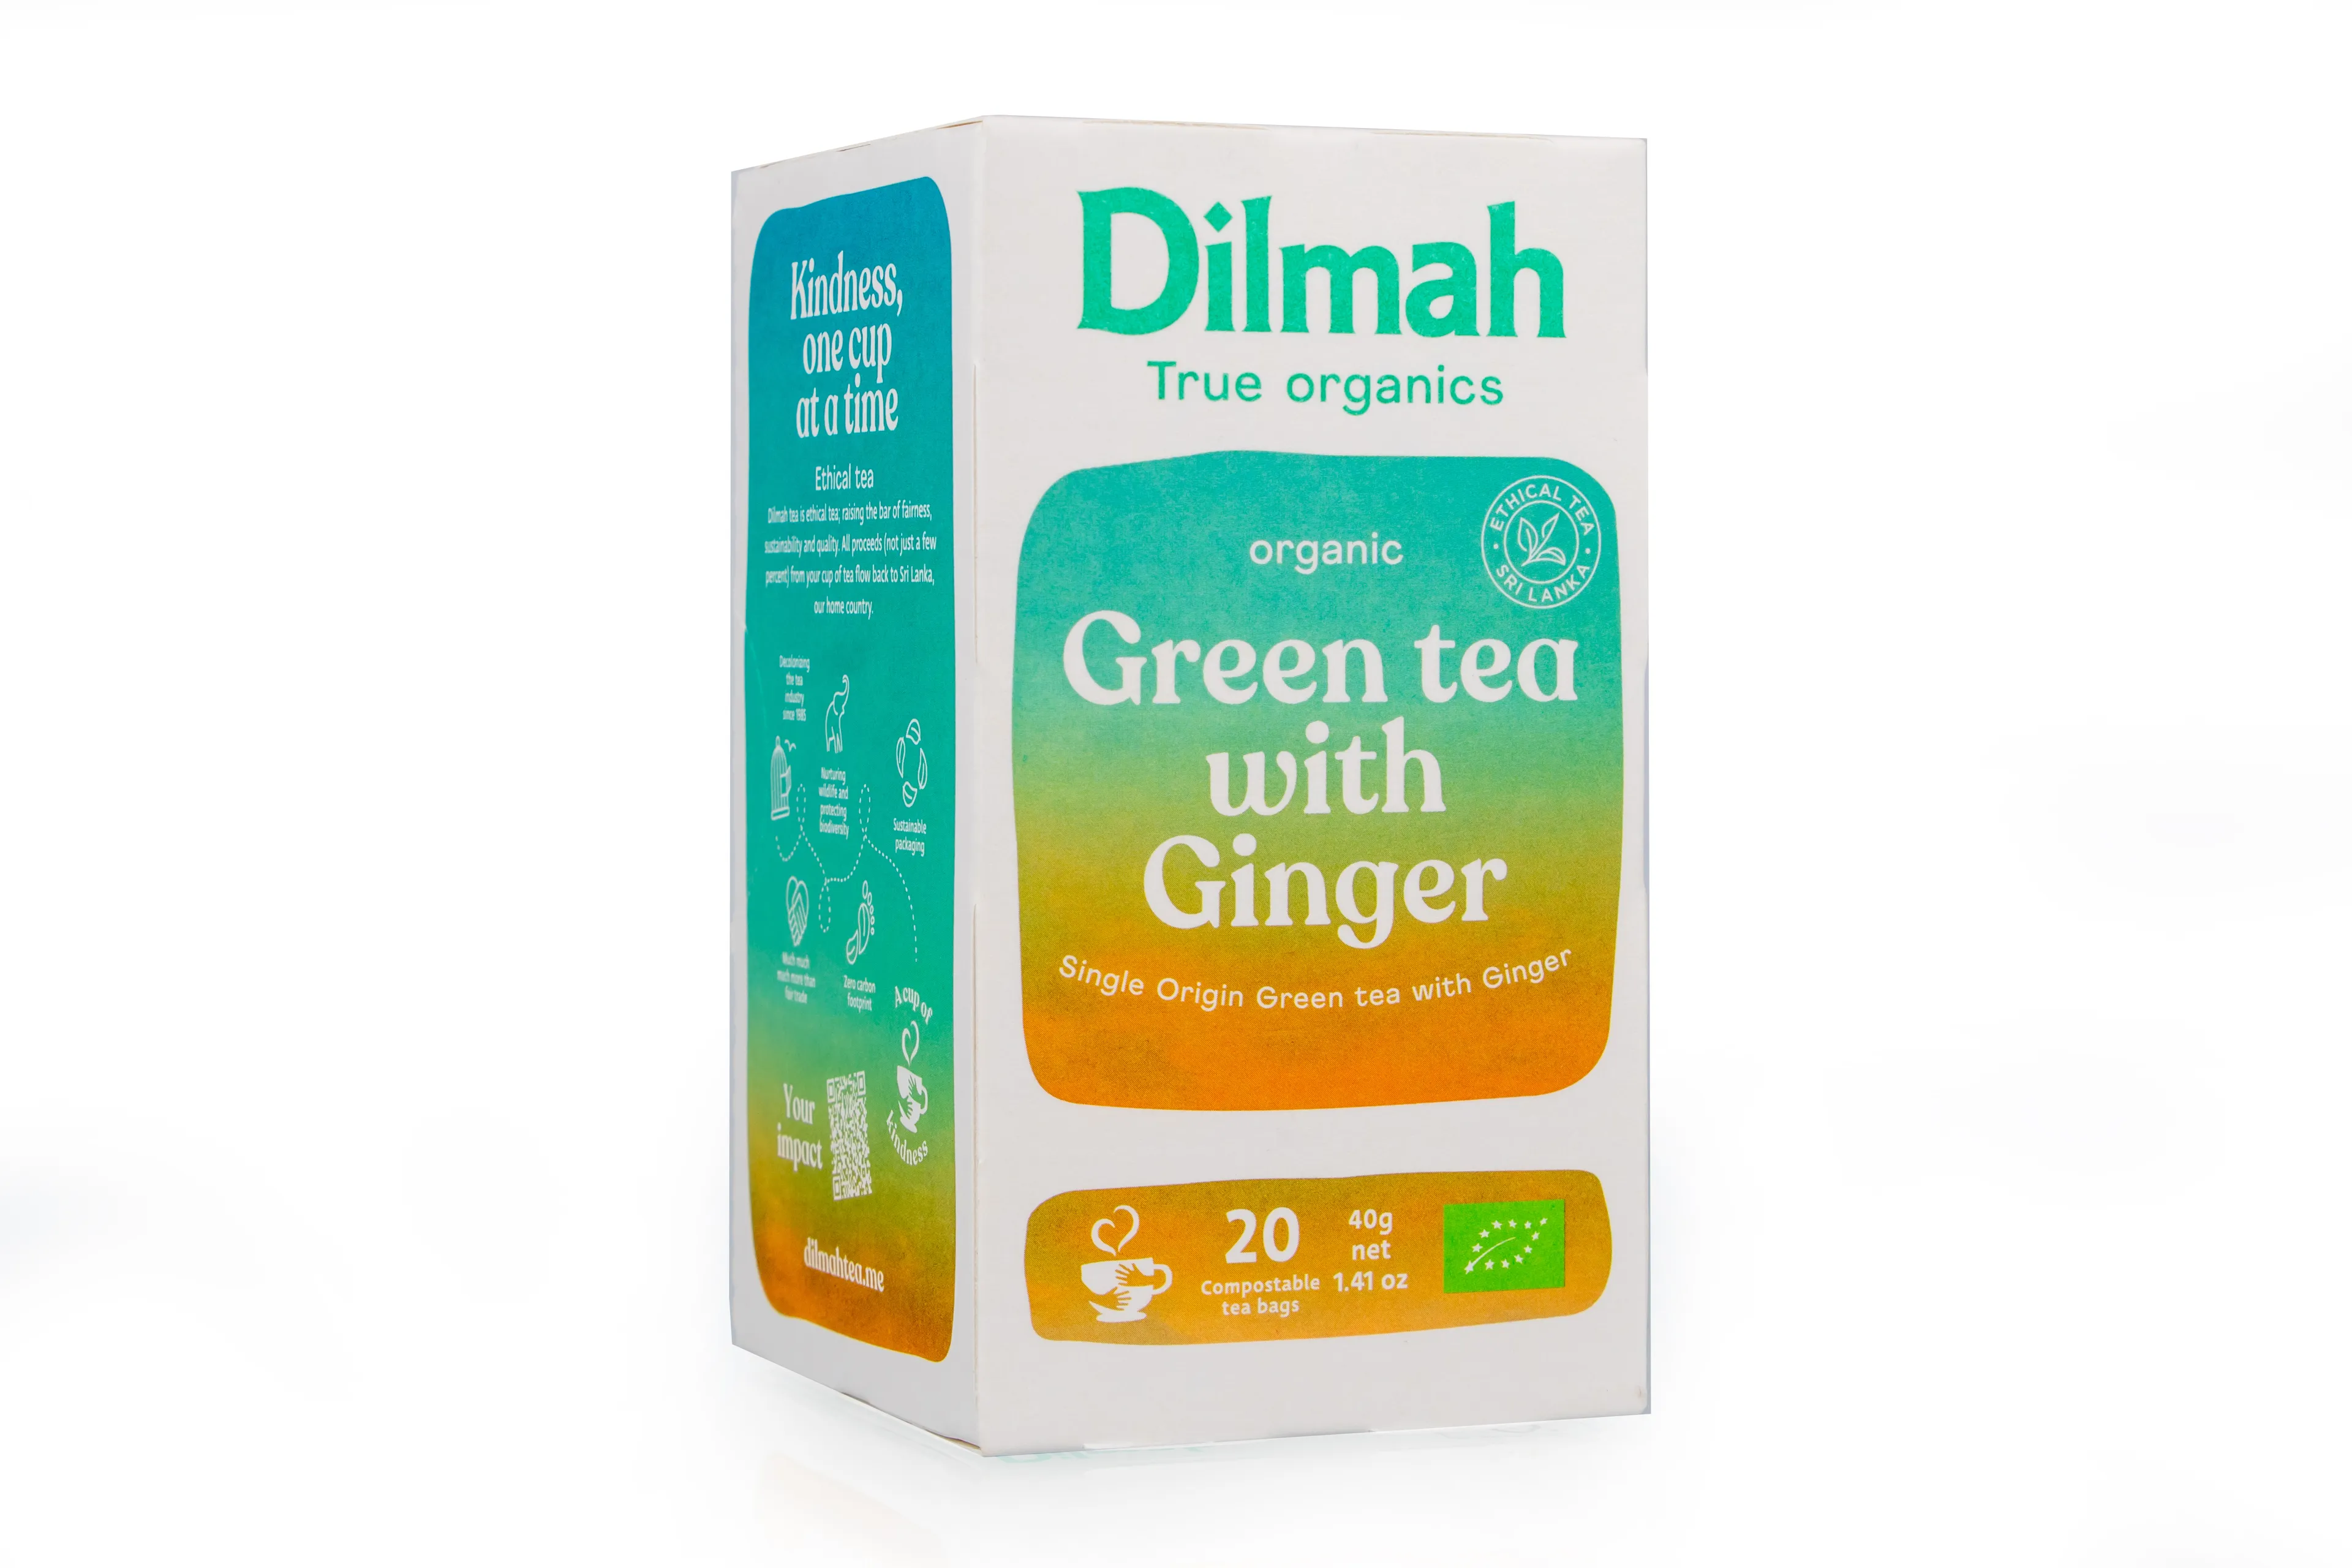 Pack of 20 individually wrapped tea bags of Organic Green Tea with Ginger